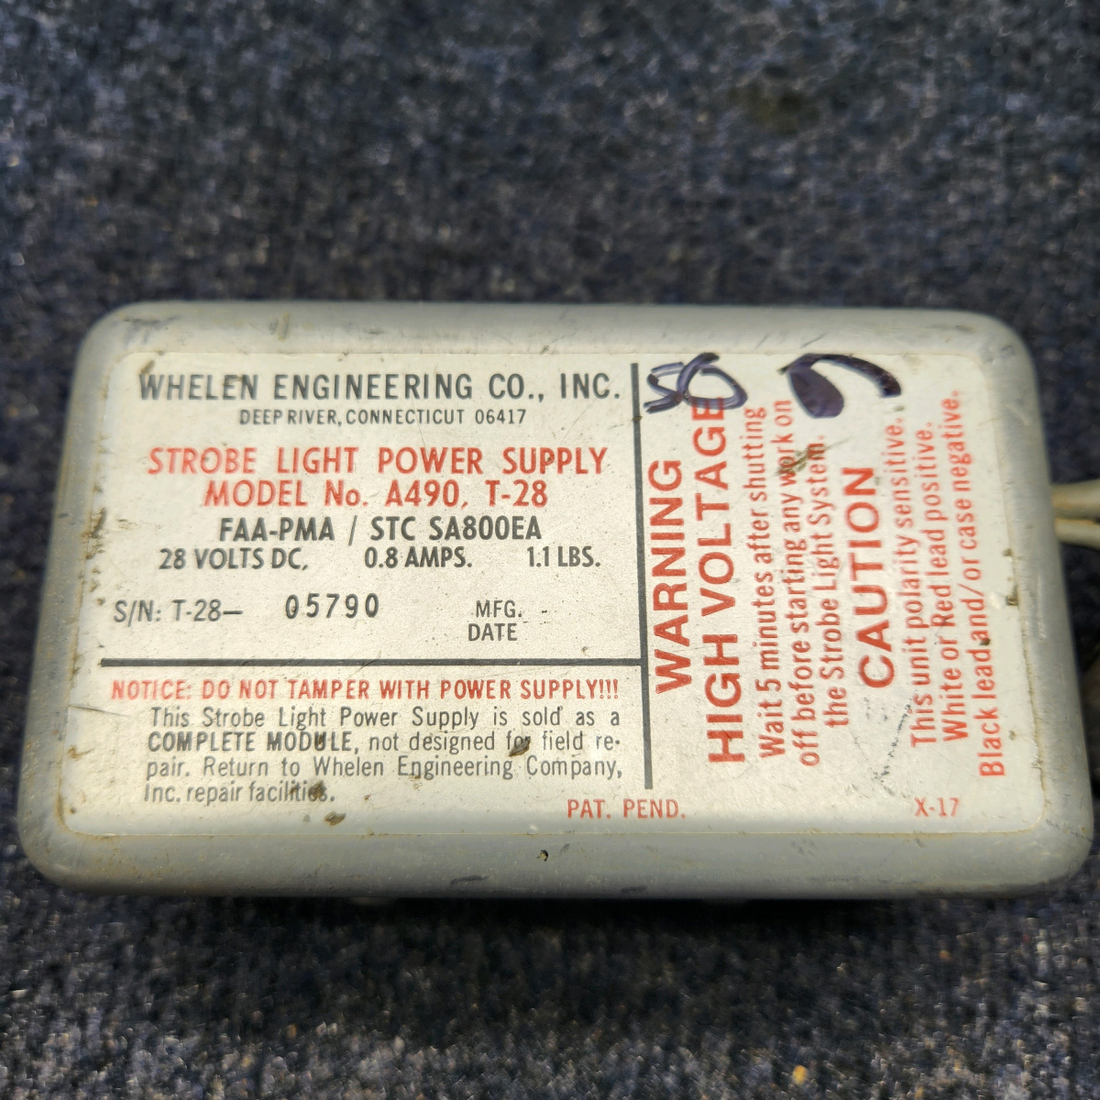 Used aircraft parts for sale, A490, T-28 Whelen Strobe Power Supply WHELLEN STROBE LIGHT POWER SUPPLY "FOR PARTS ONLY" 28VOLTS